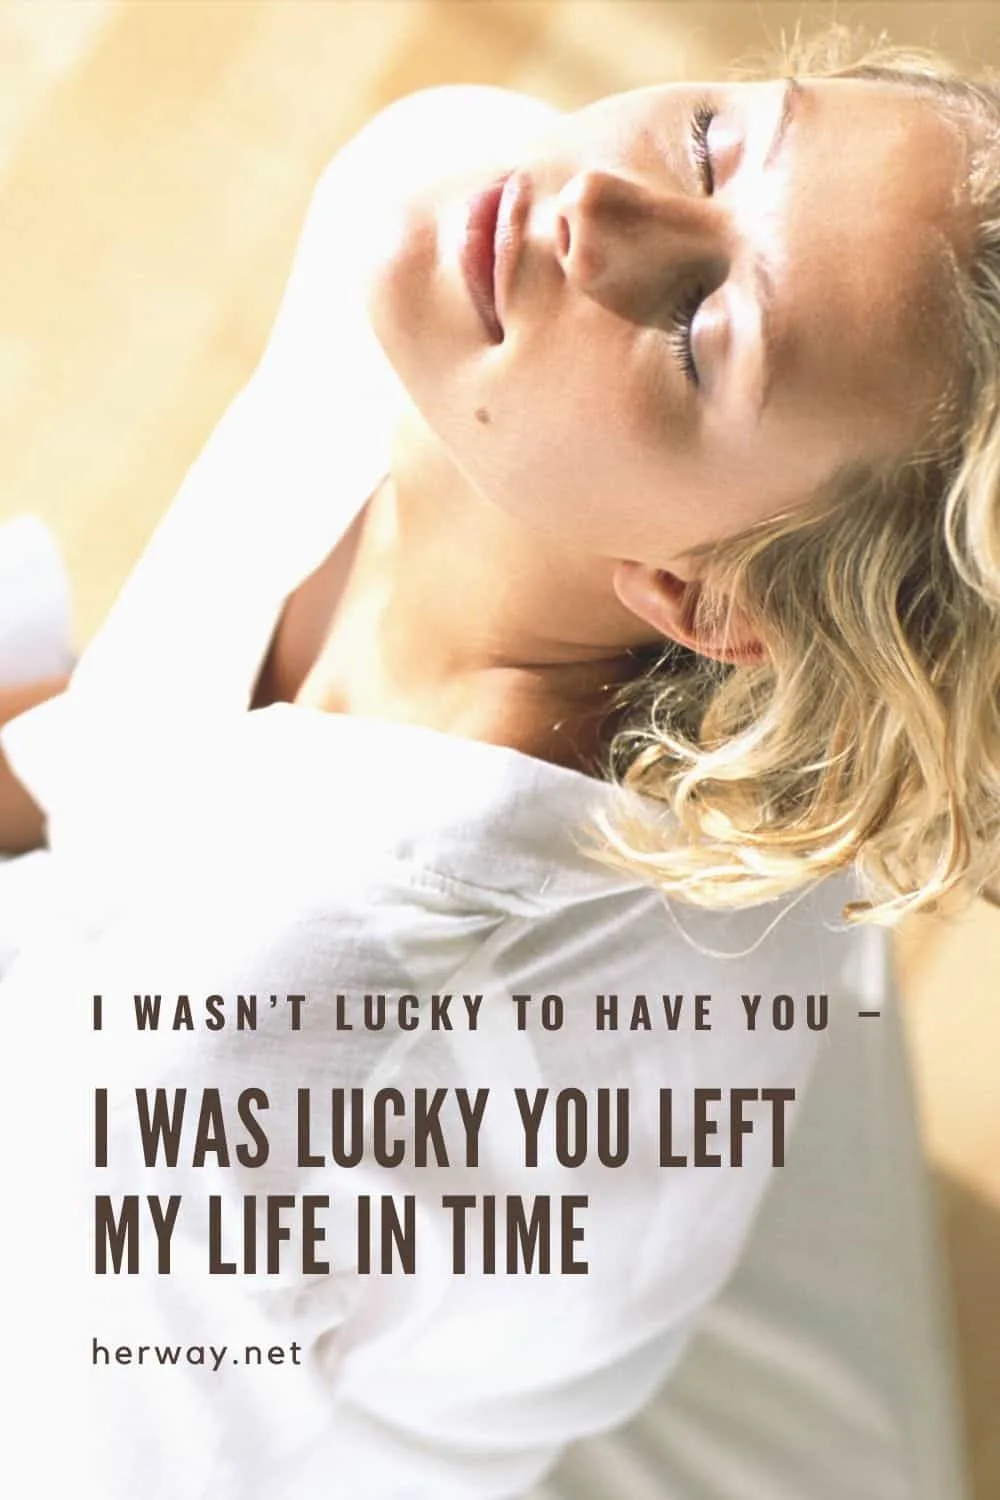 I Wasn't Lucky To Have You - I Was Lucky You Left My Life In Time